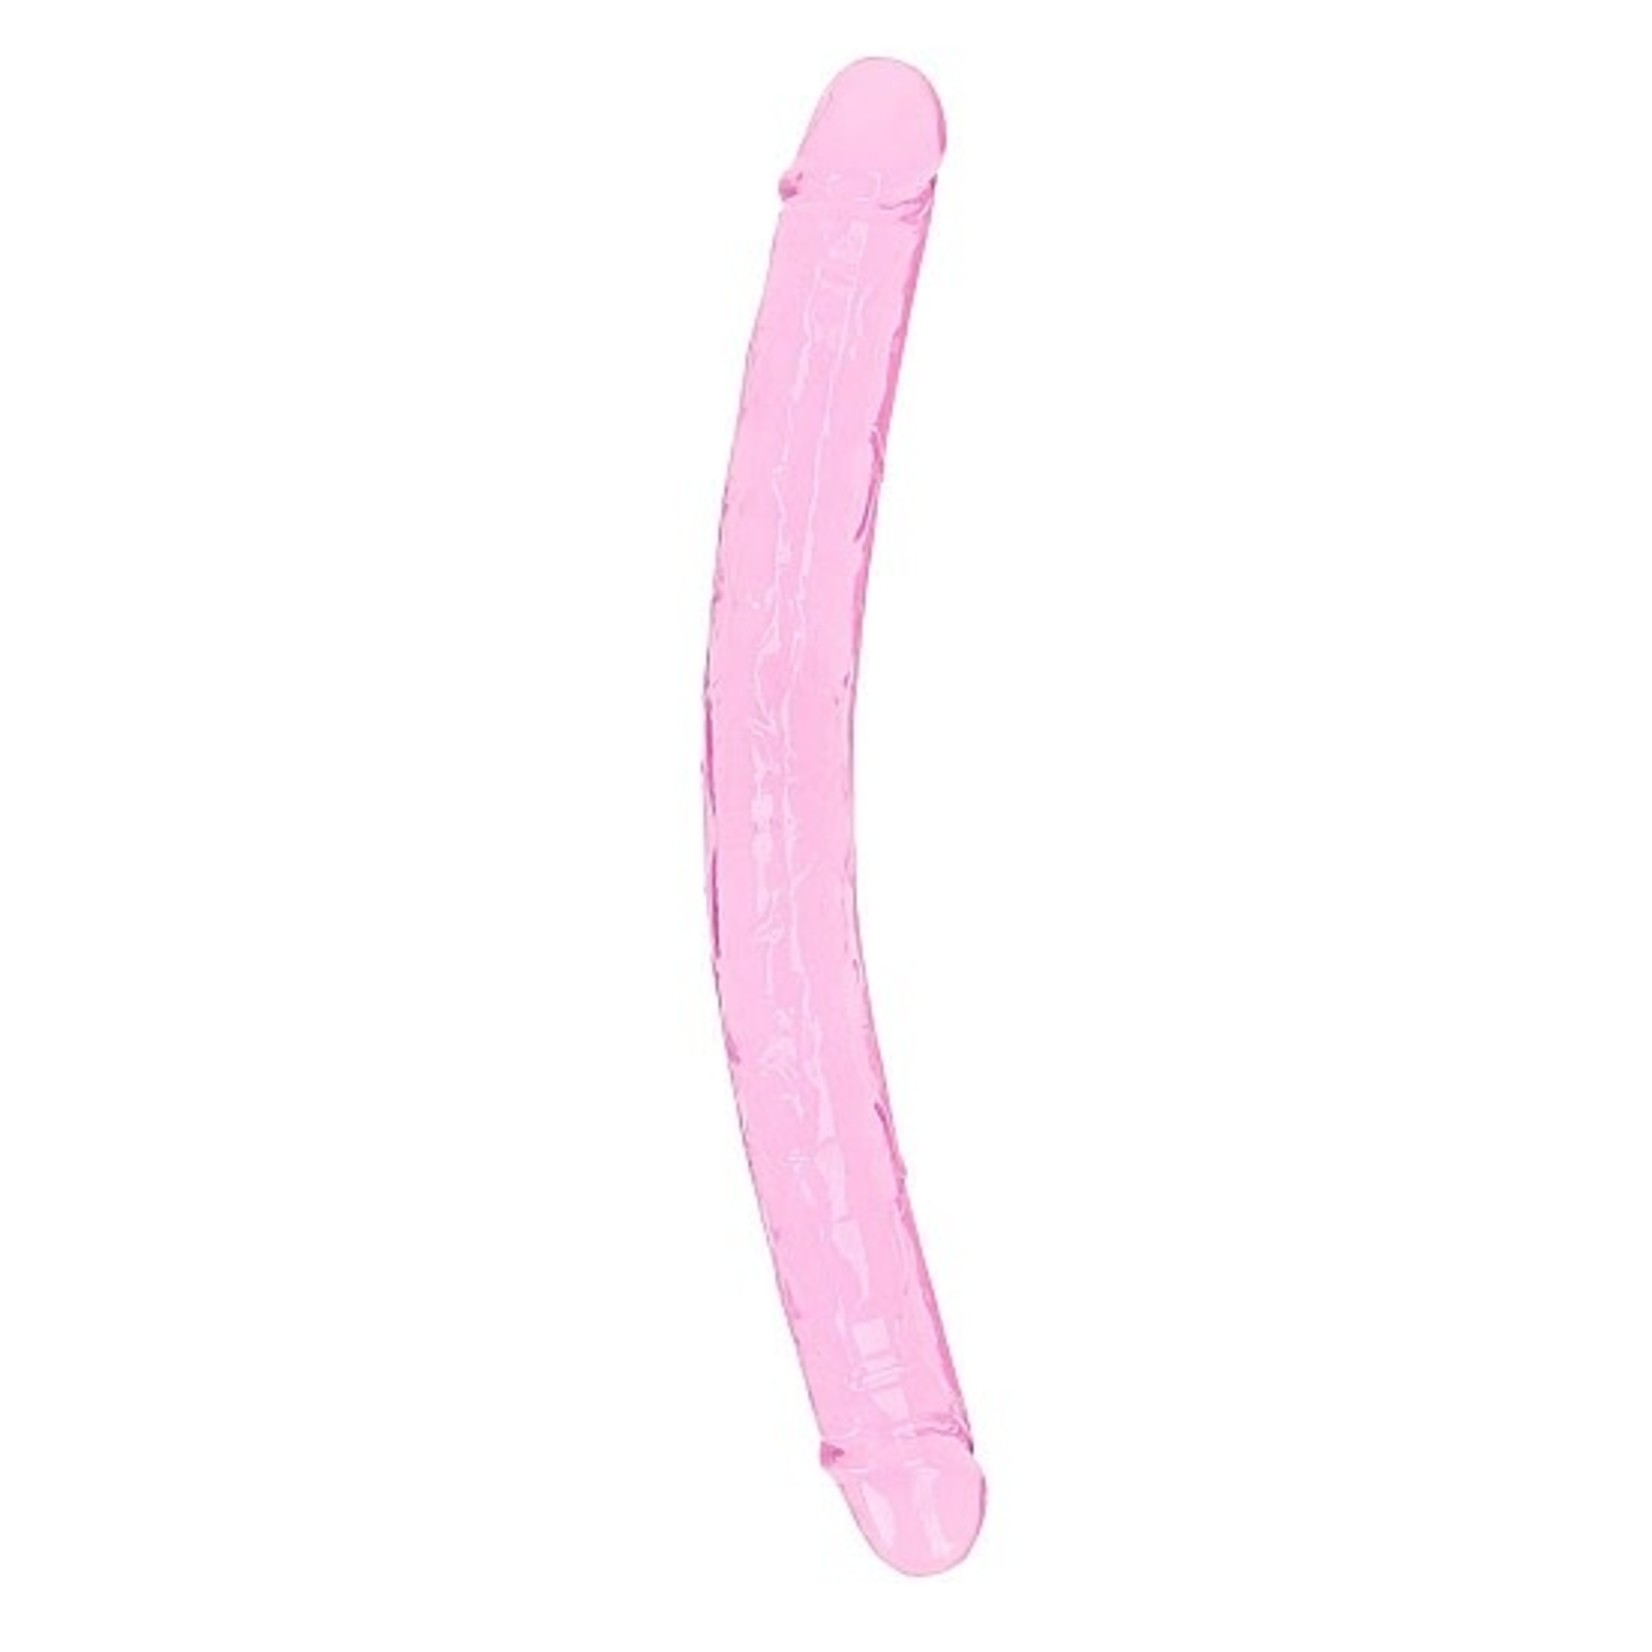 SHOTS REALROCK CRYSTAL CLEAR JELLY 18 INCH DOUBLE DILDO